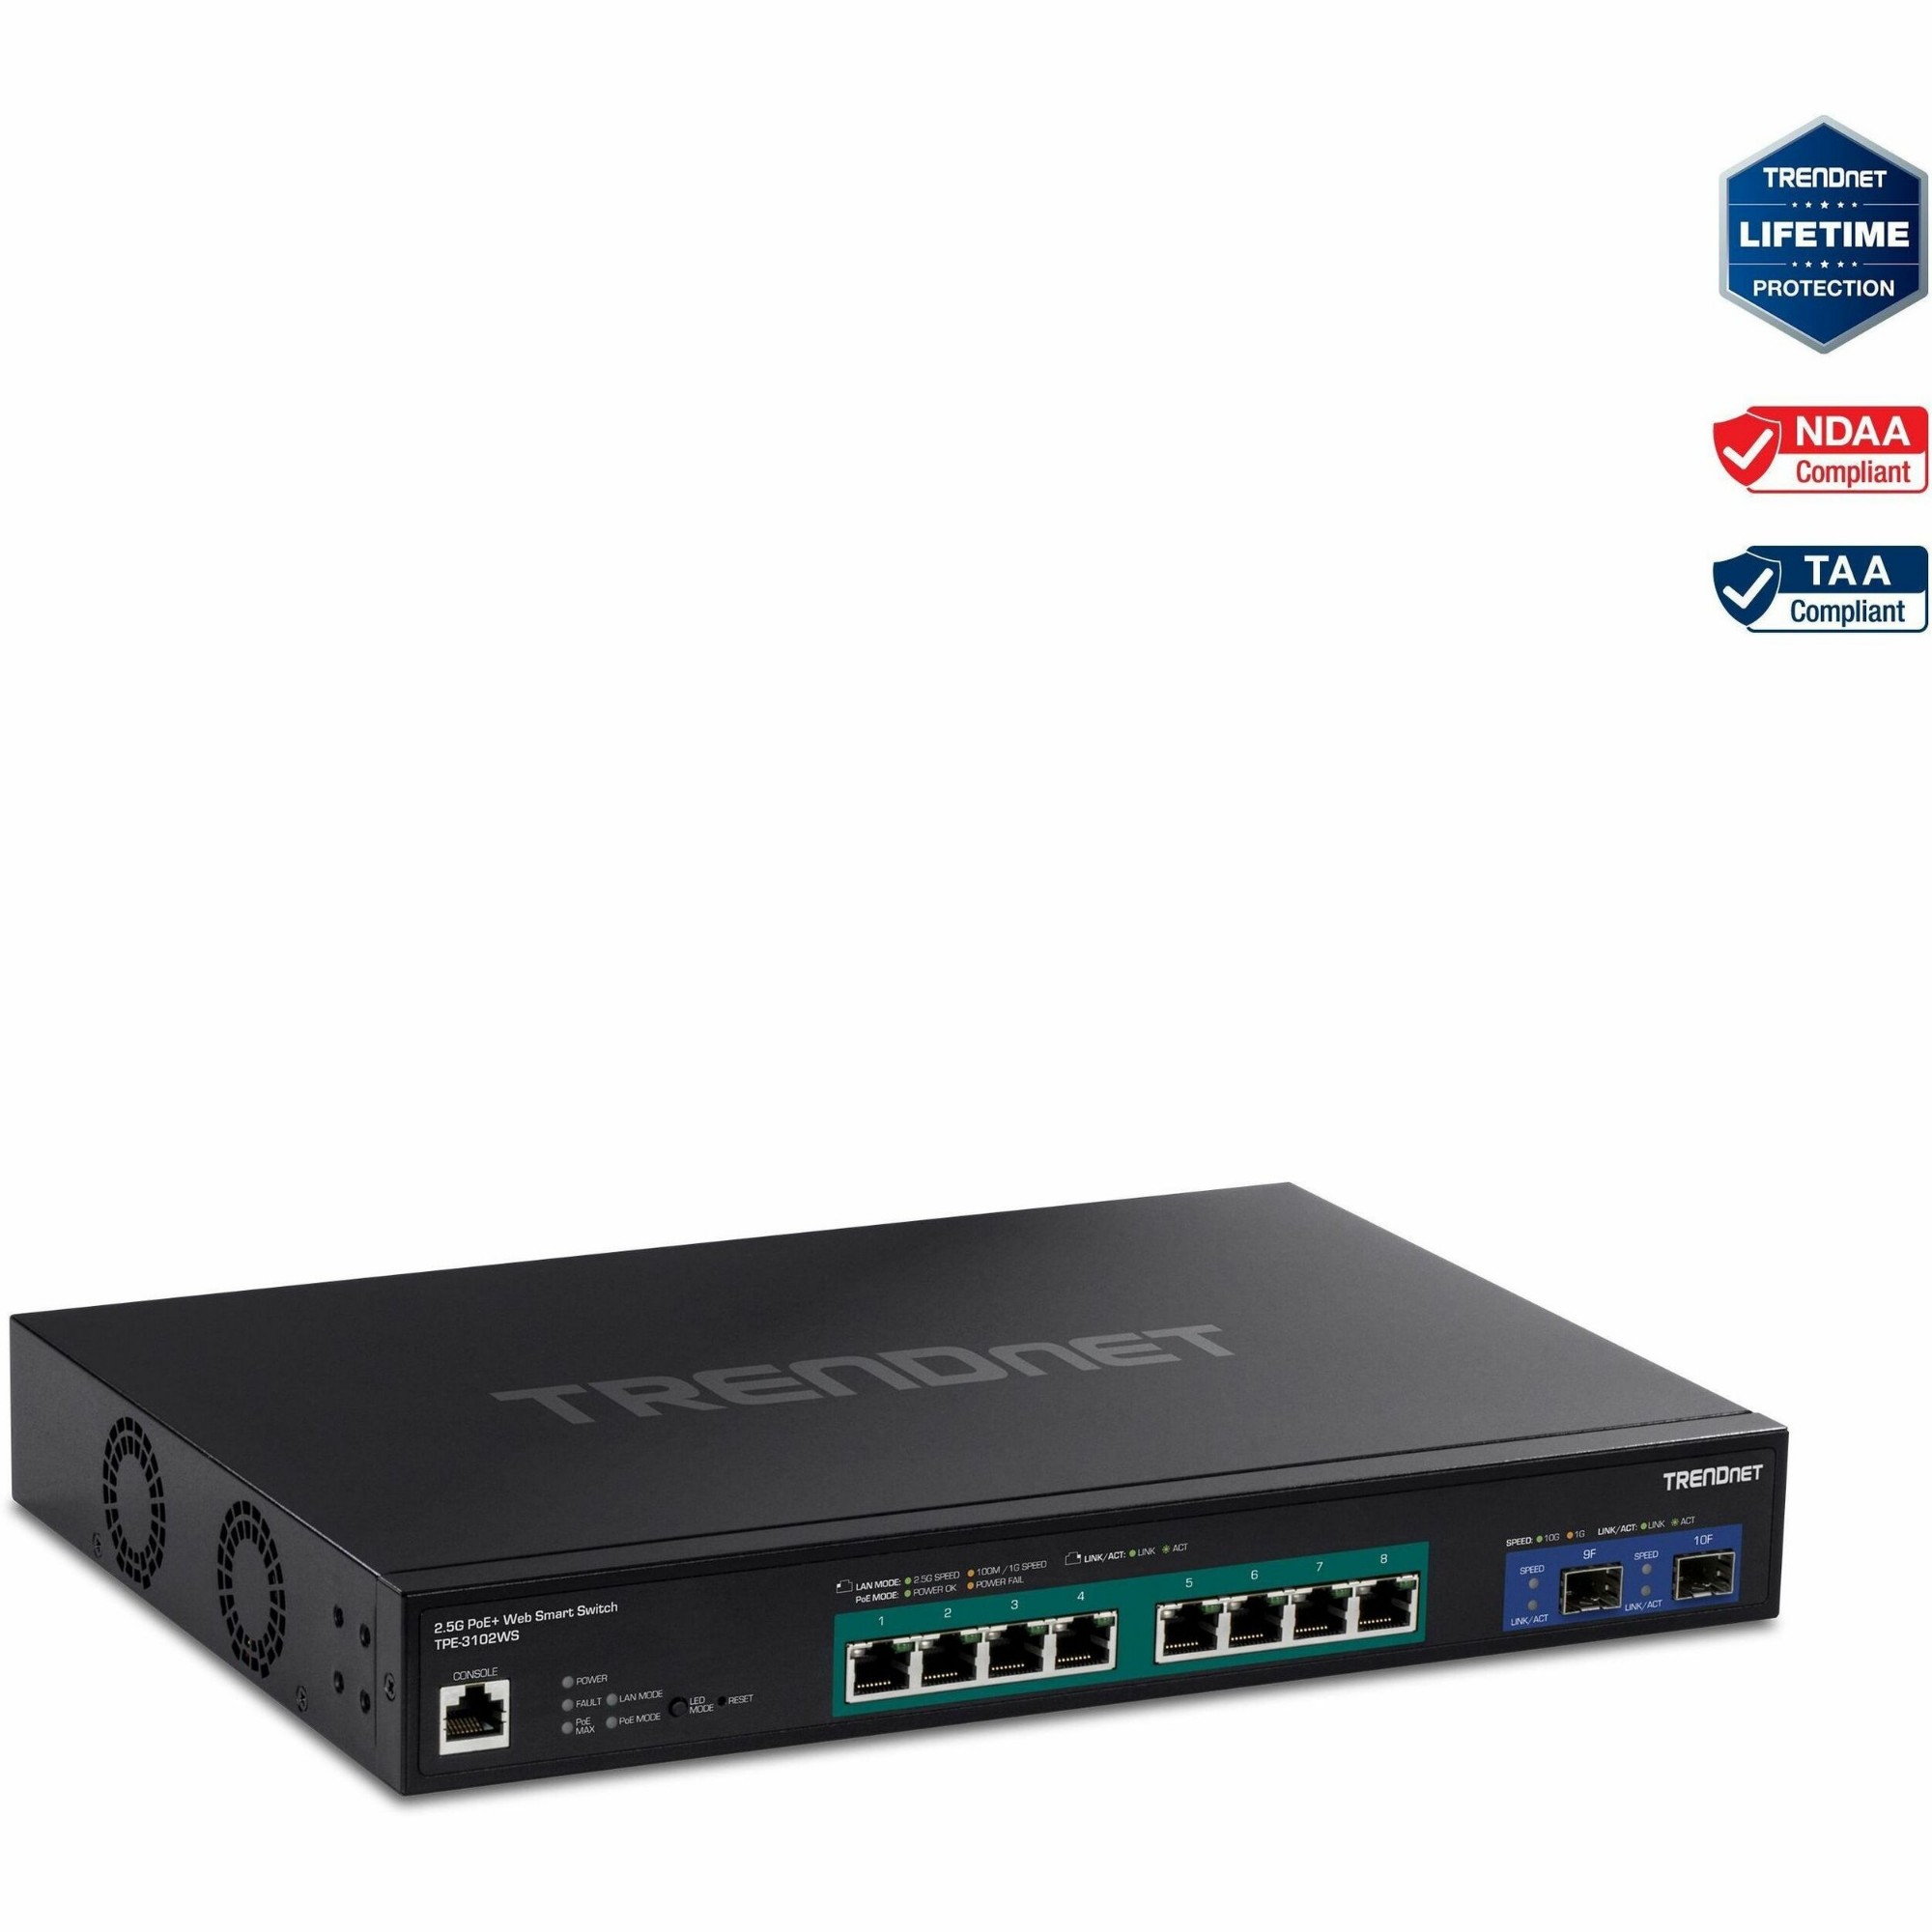 TPE-3102WS TRENDNET TPE-3102WS 10-Port 2.5G Web Smart PoE+ Switch with 10G SFP+ Slots